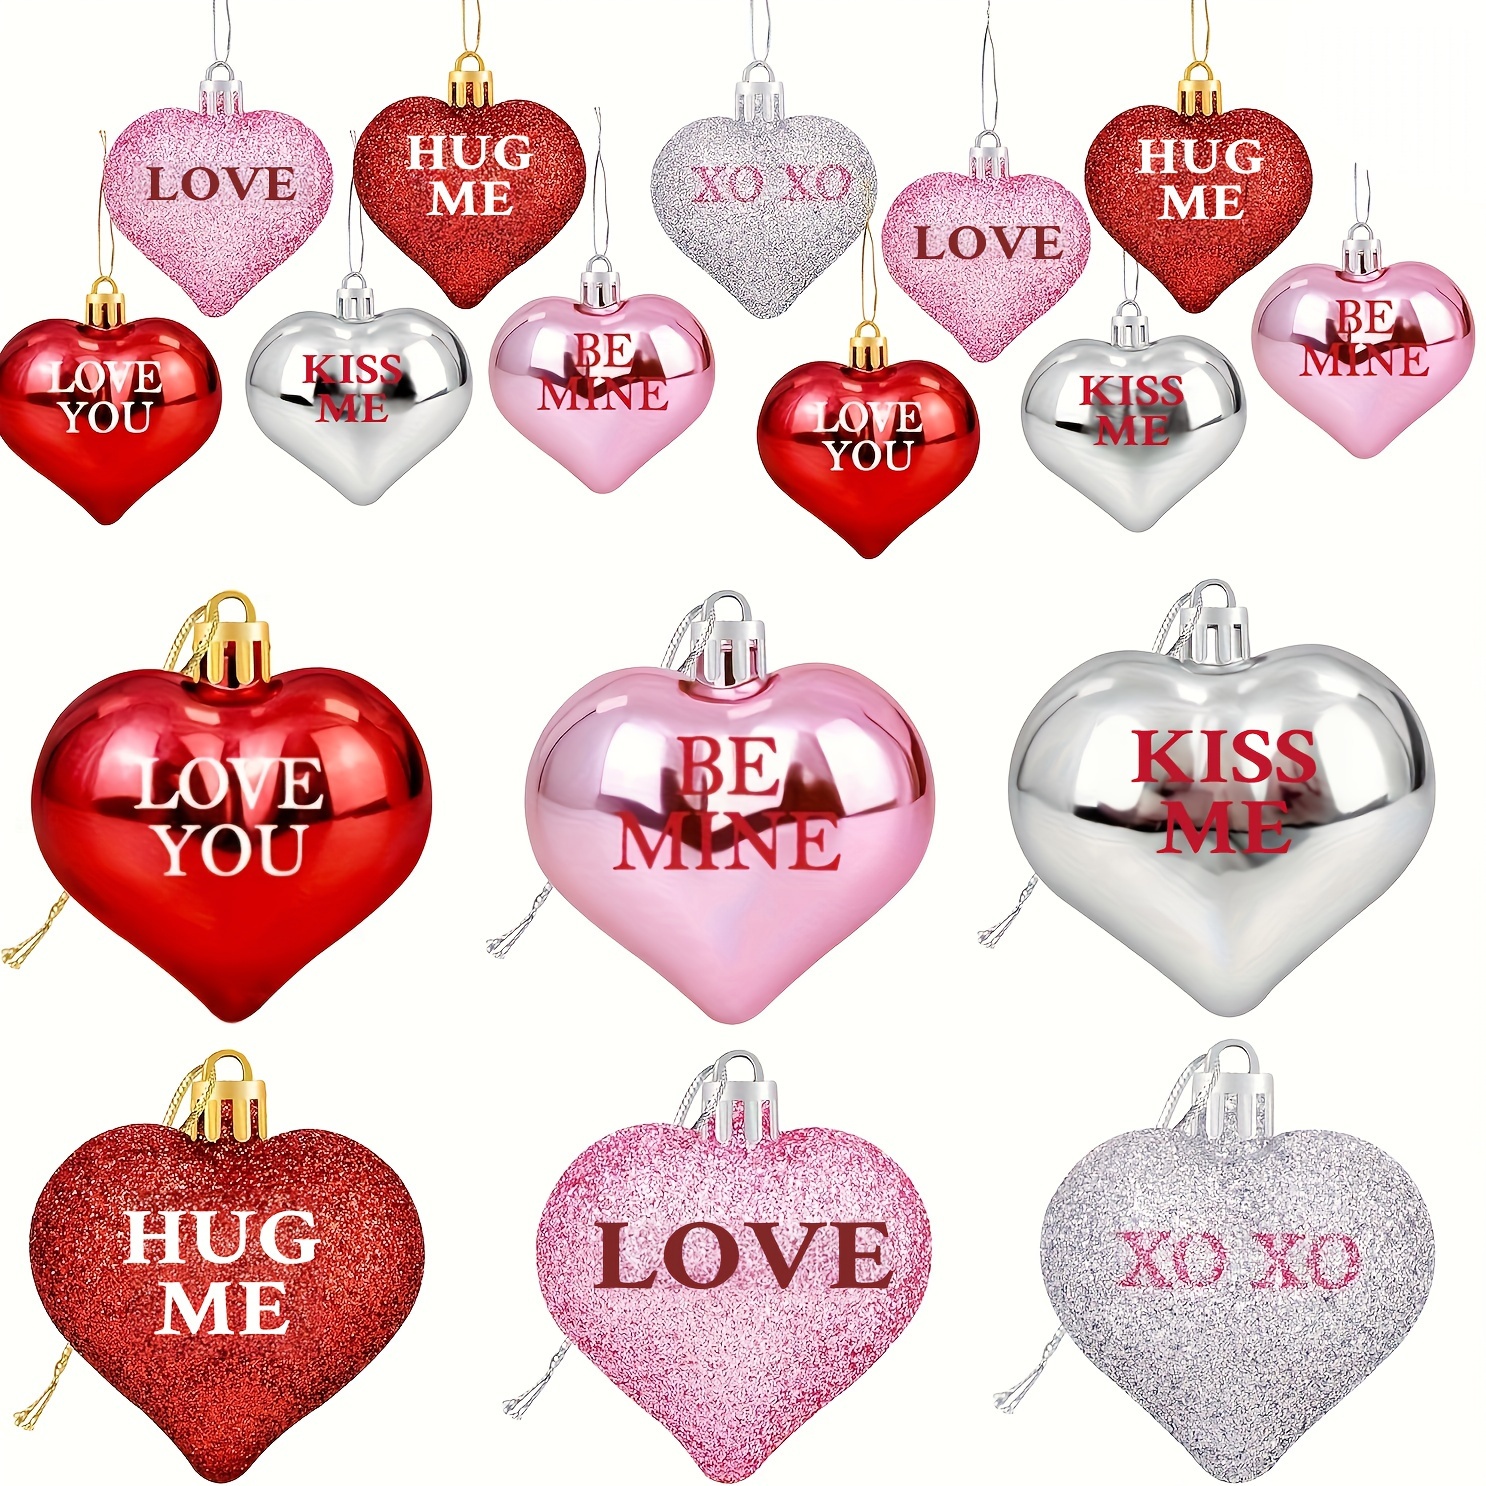 36 Pieces Heart Shaped Baubles Glitter Heart Shaped Ornaments for  Valentine's Day Holidays Decoration, 3 Colors